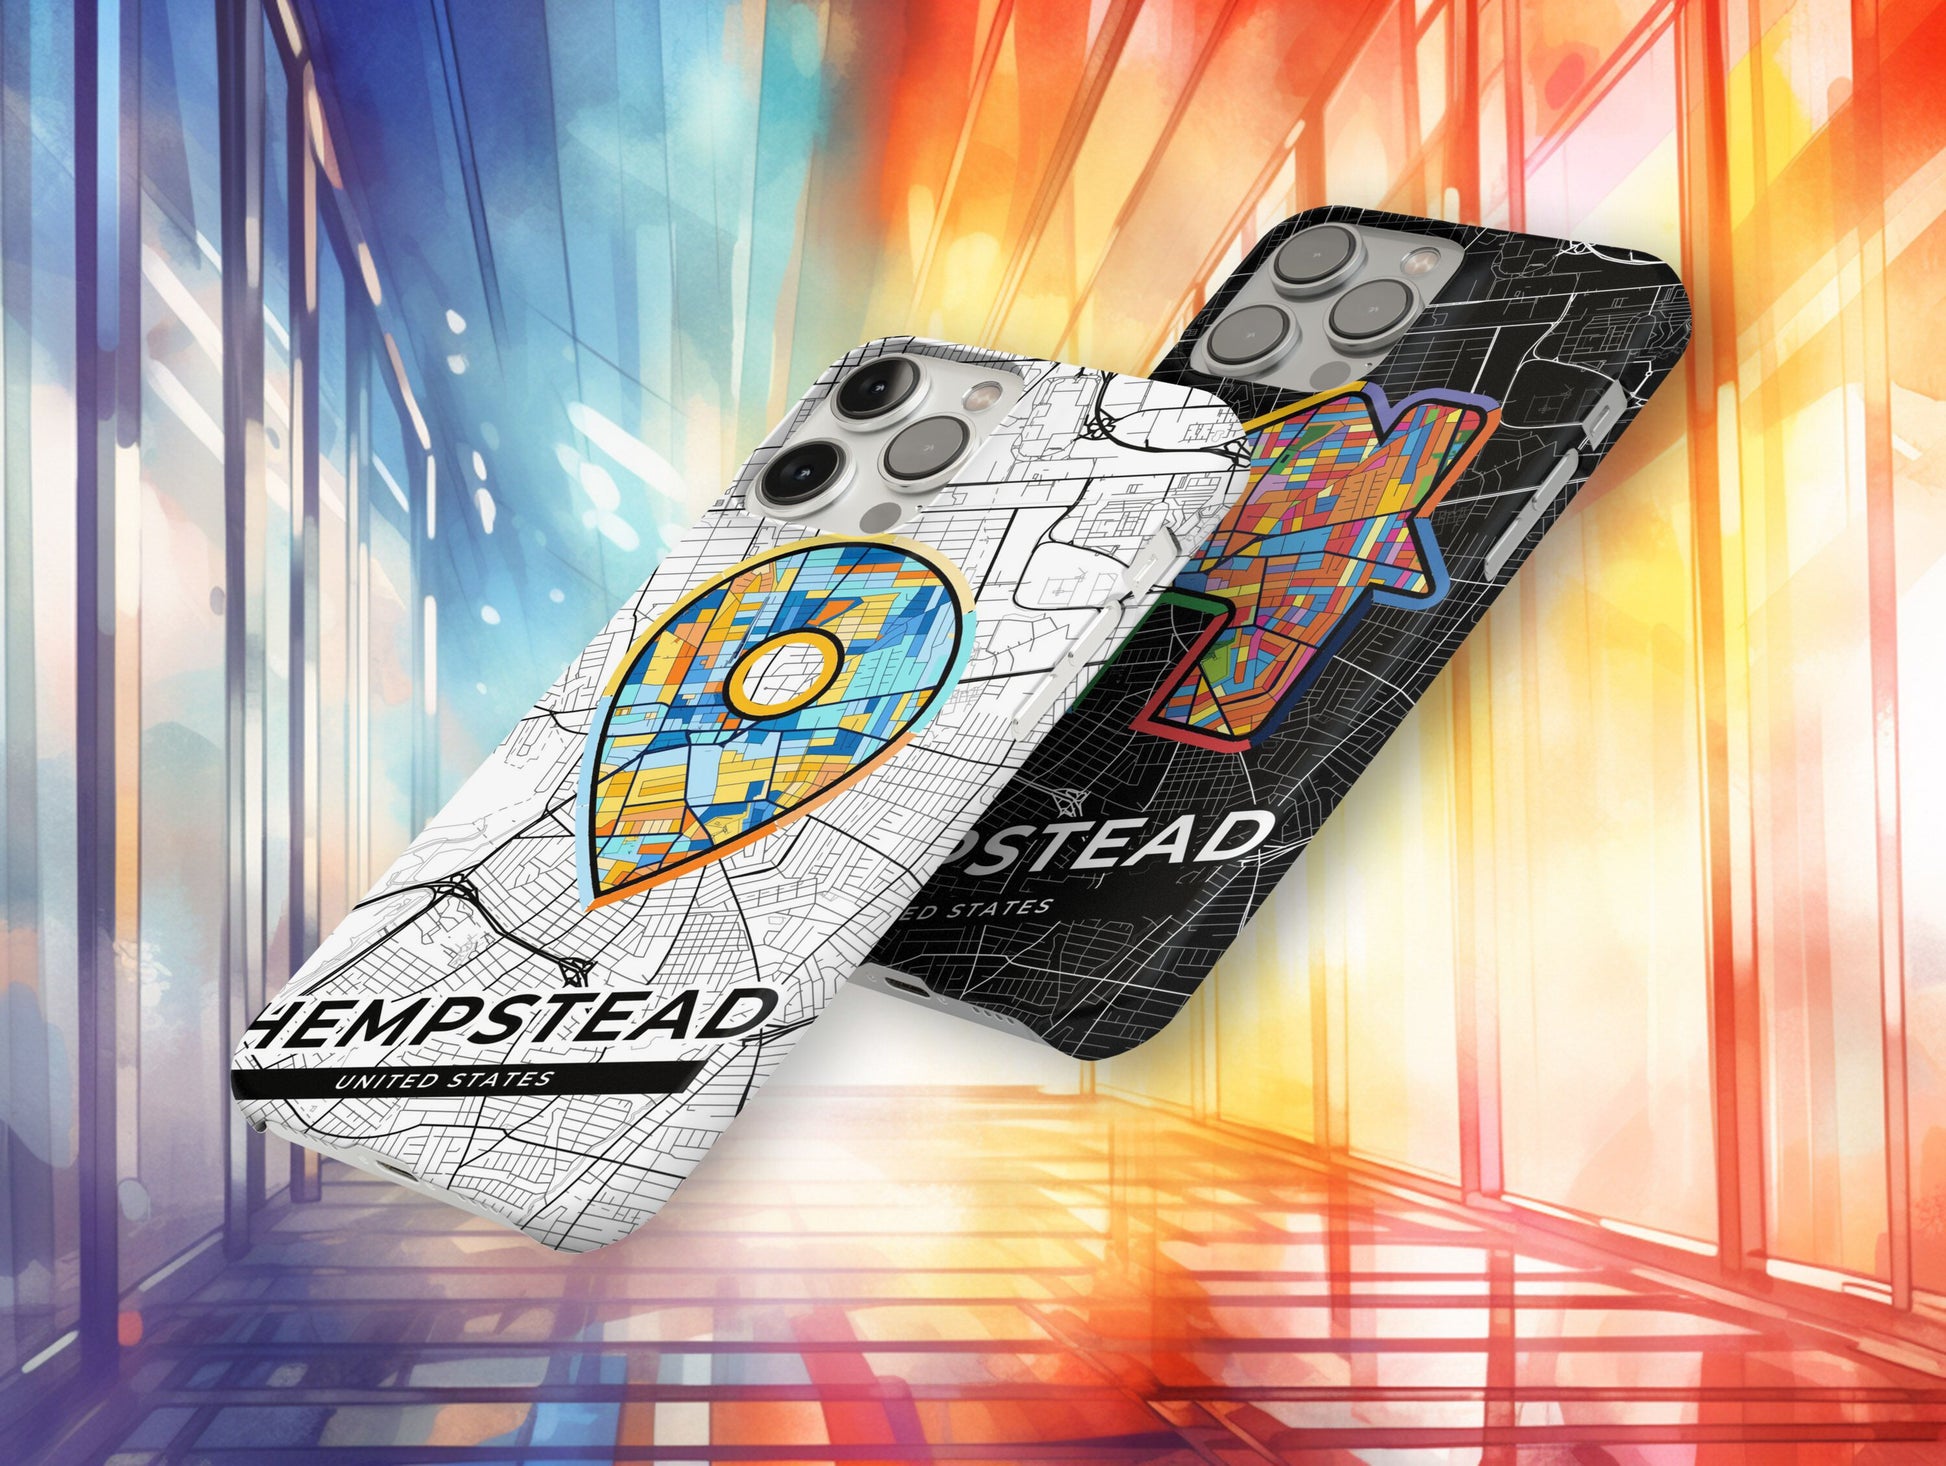 Hempstead New York slim phone case with colorful icon. Birthday, wedding or housewarming gift. Couple match cases.